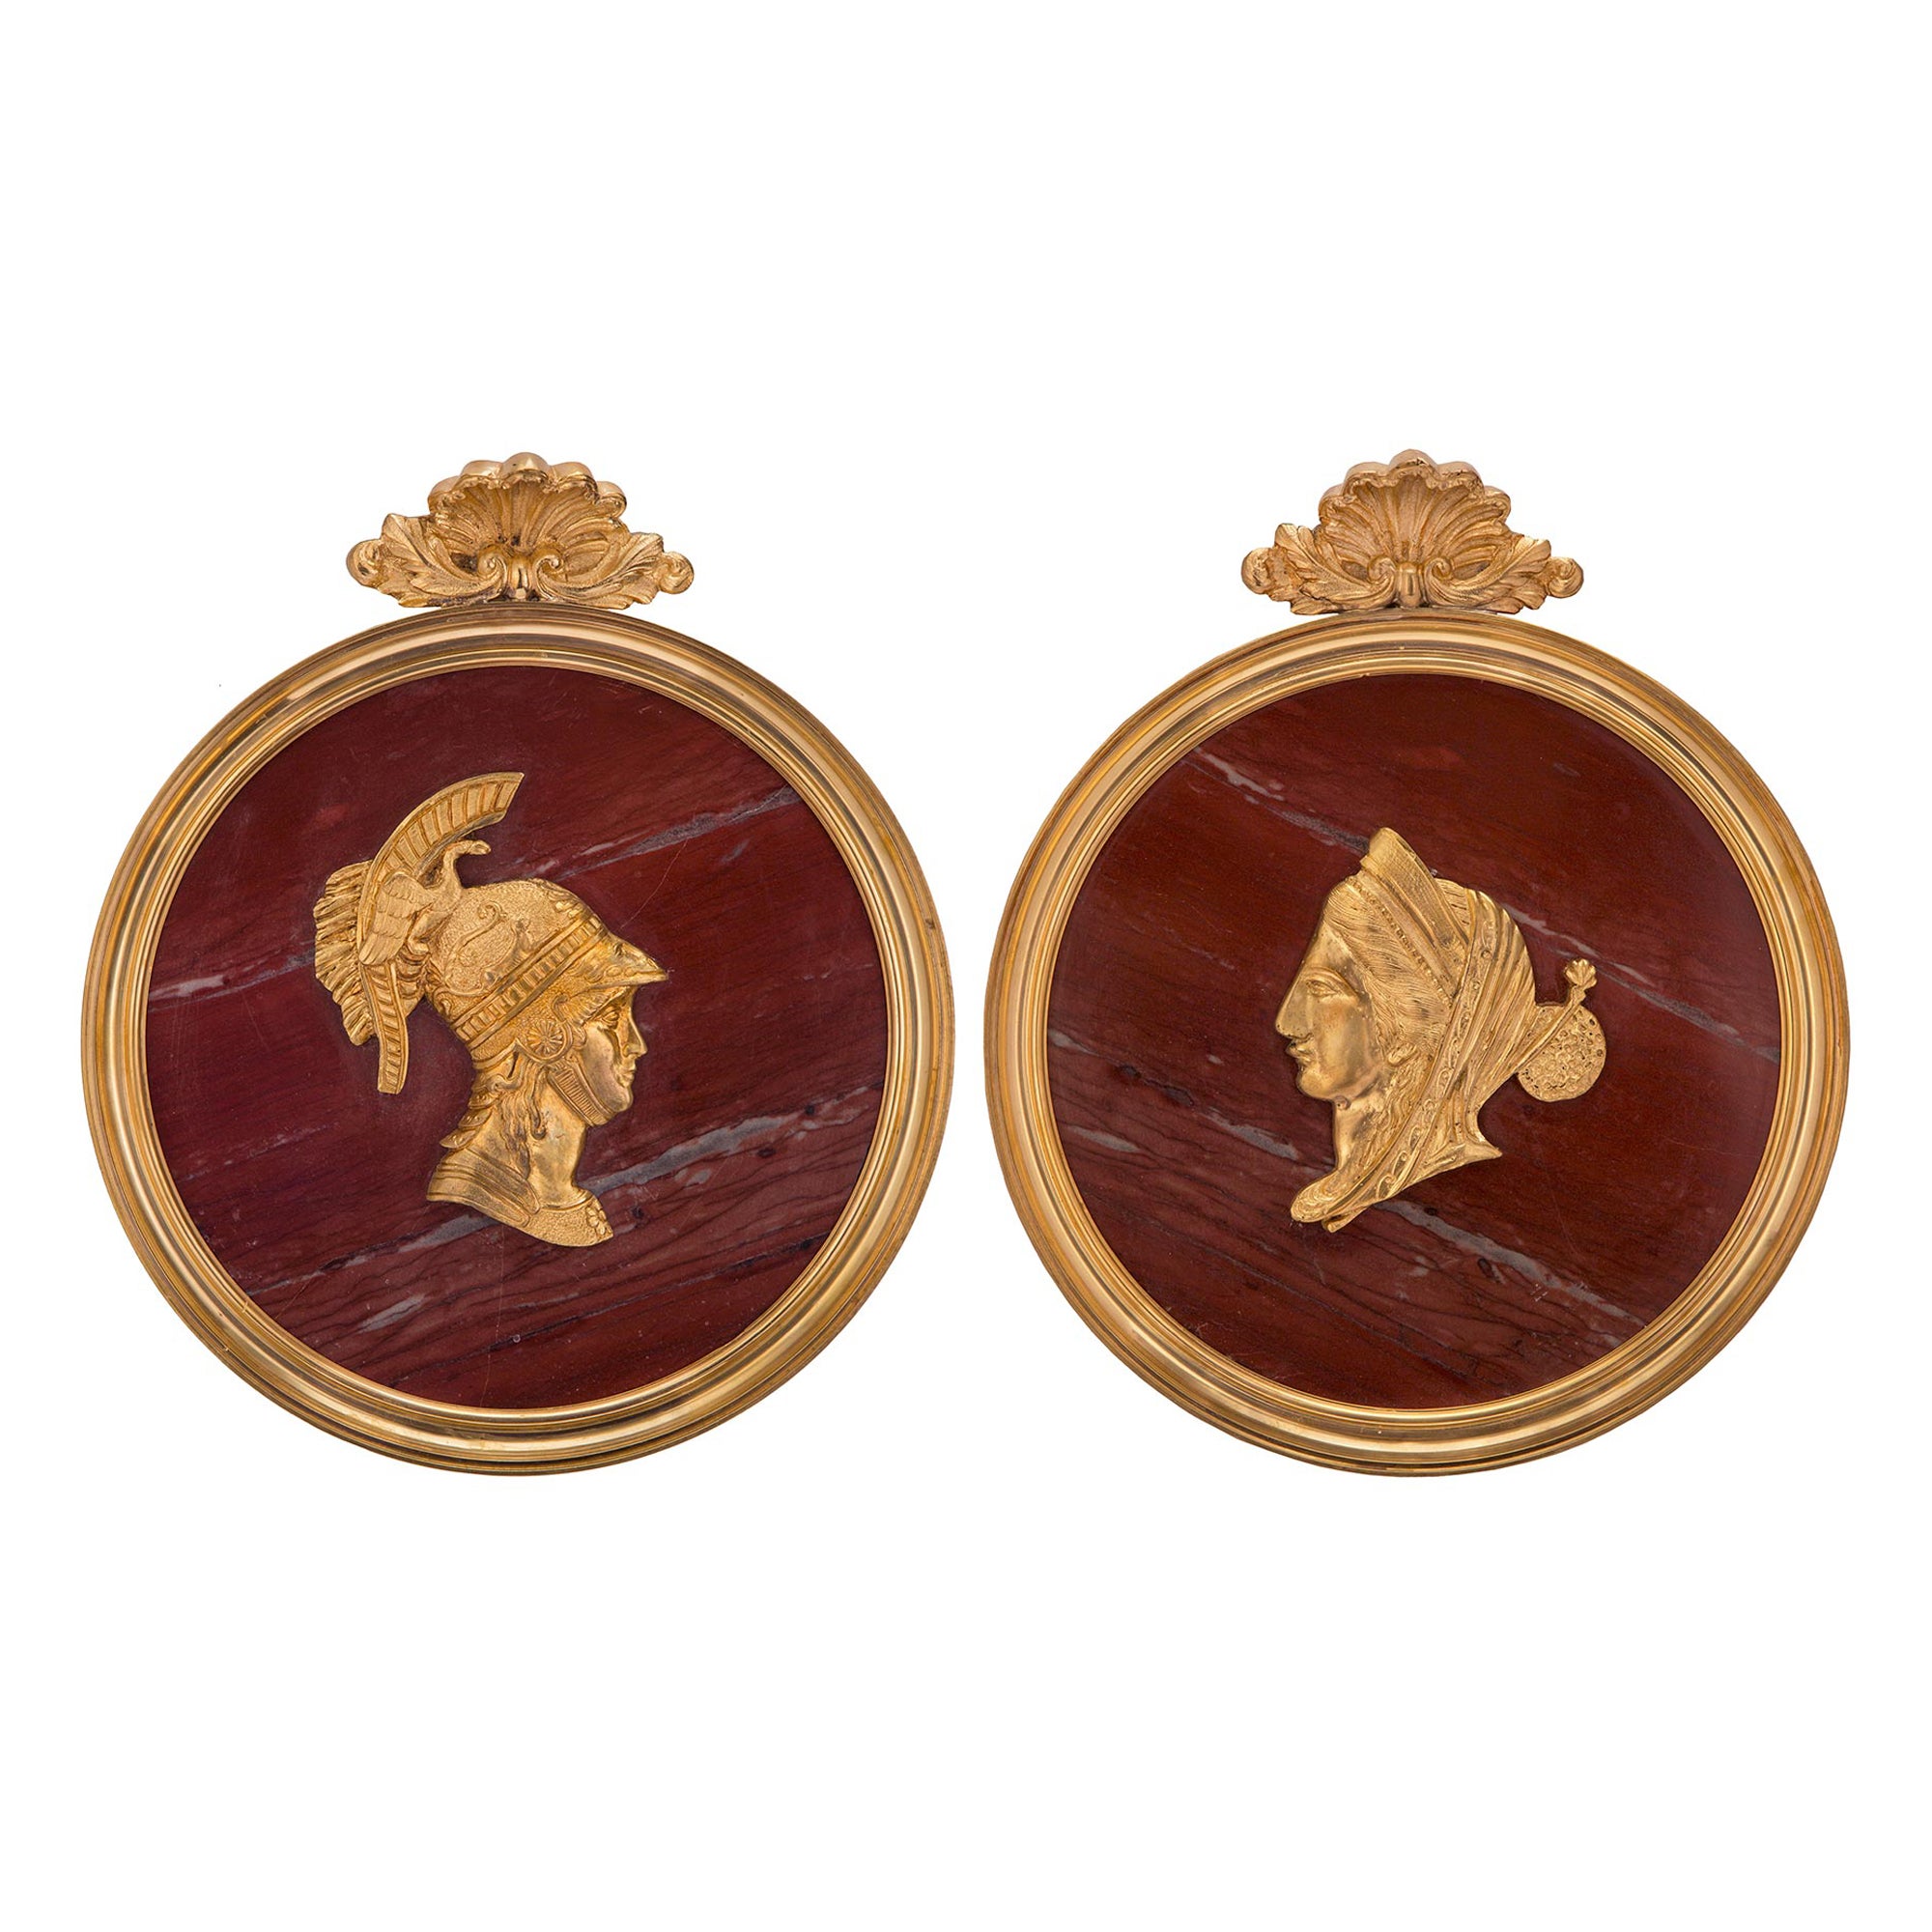 True Pair Of Italian 19th Century Neoclassical St. Marble & Ormolu Wall Plaques For Sale